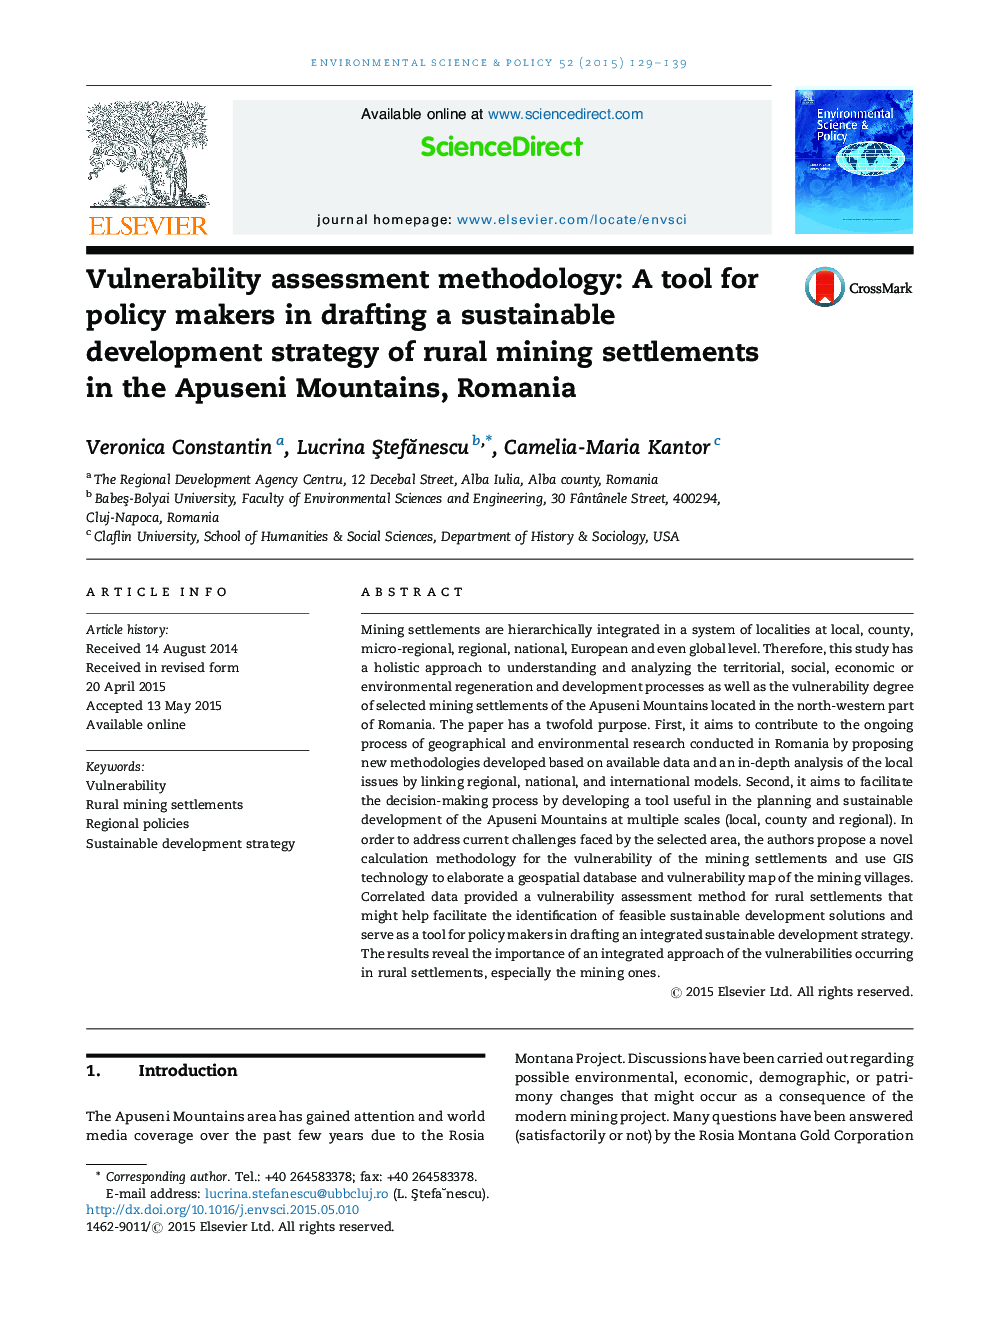 Vulnerability assessment methodology: A tool for policy makers in drafting a sustainable development strategy of rural mining settlements in the Apuseni Mountains, Romania